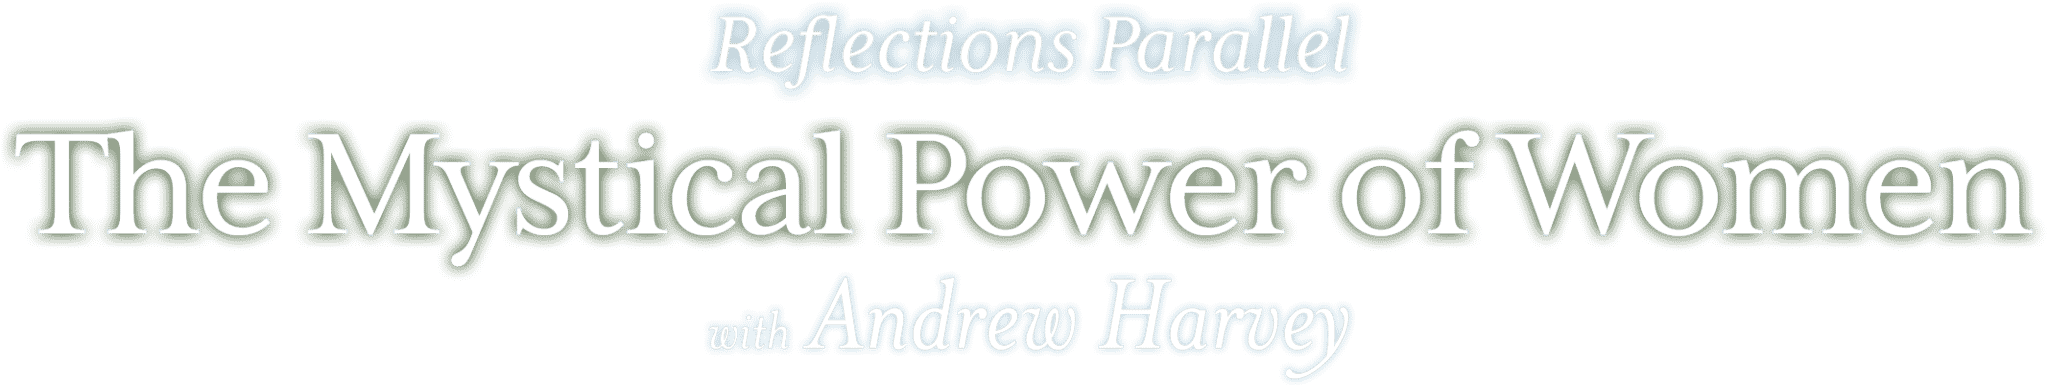 Reflections Parallel: The Mystical Power of Women - featuring Andrew Harvey